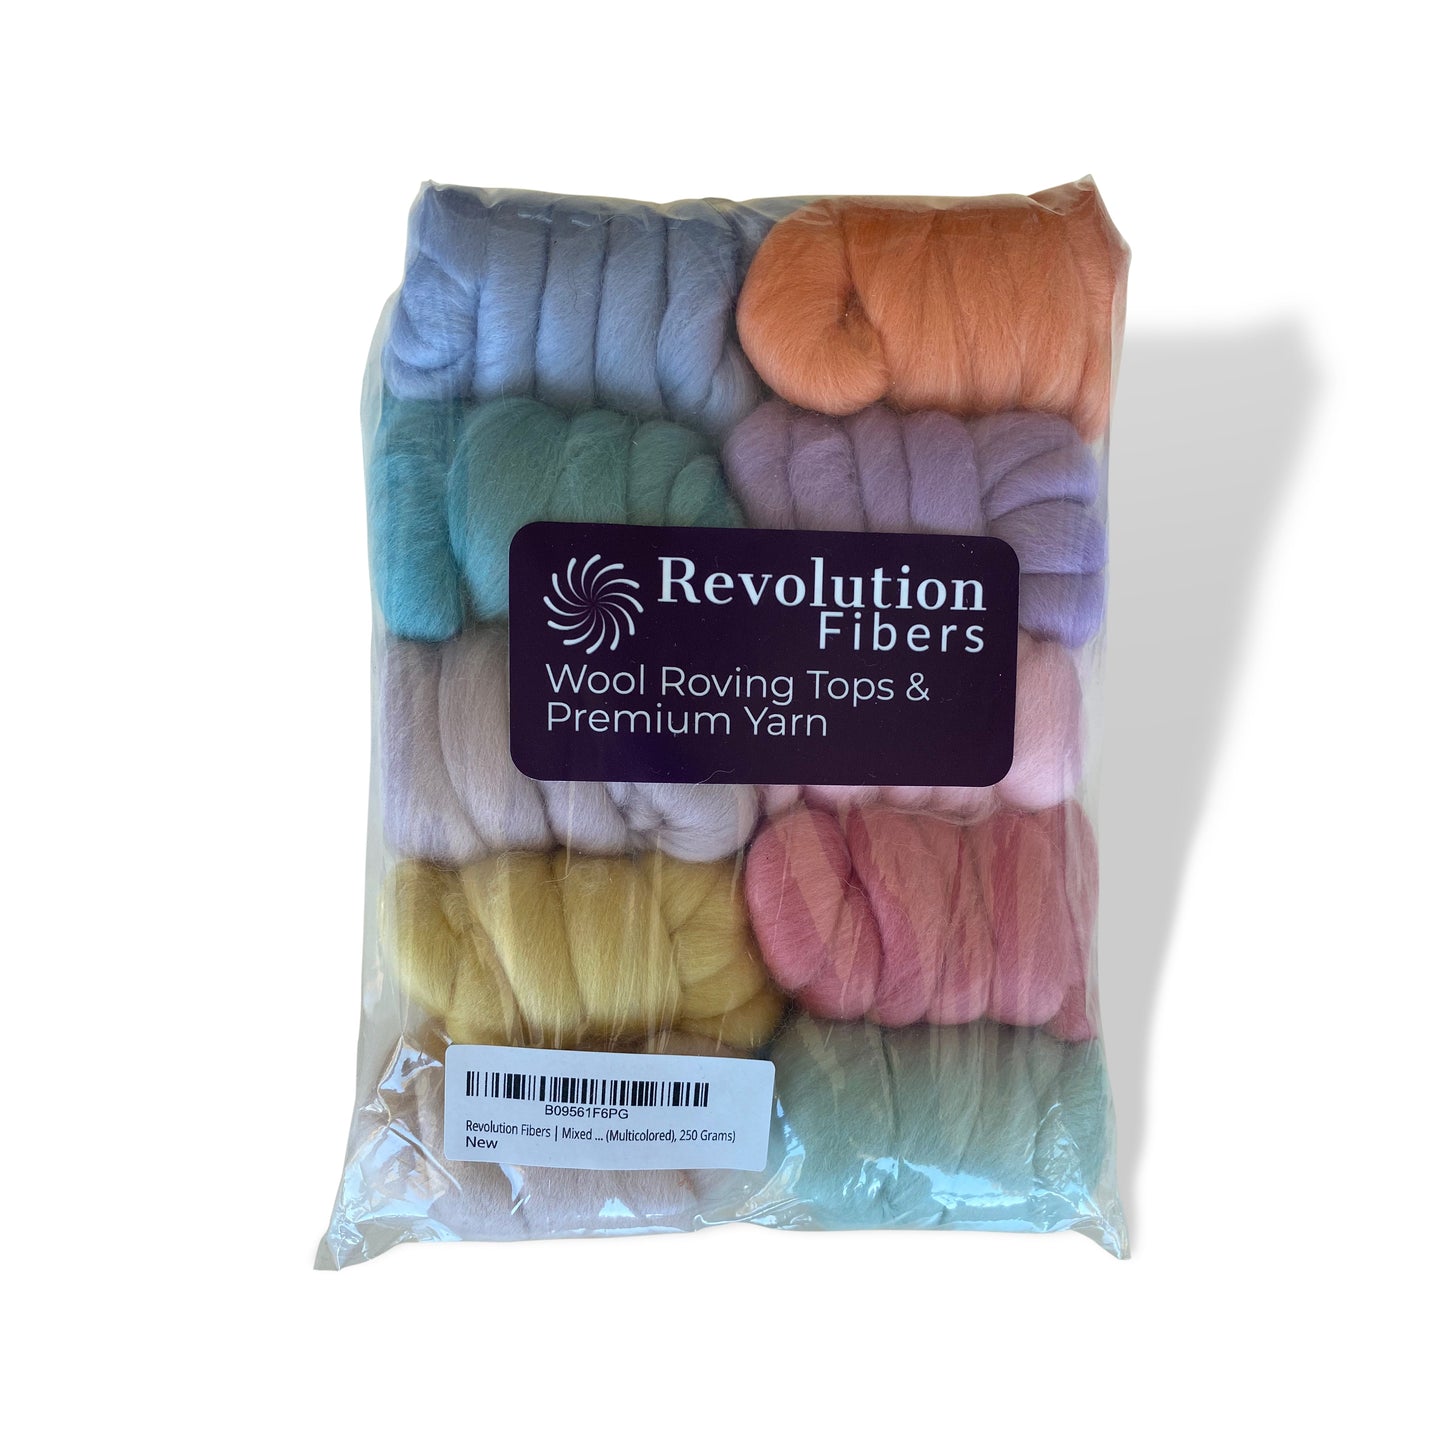 Mixed Merino Wool Variety Pack | Pretty Pastels (Multicolored) 250 Grams, 23 Micron